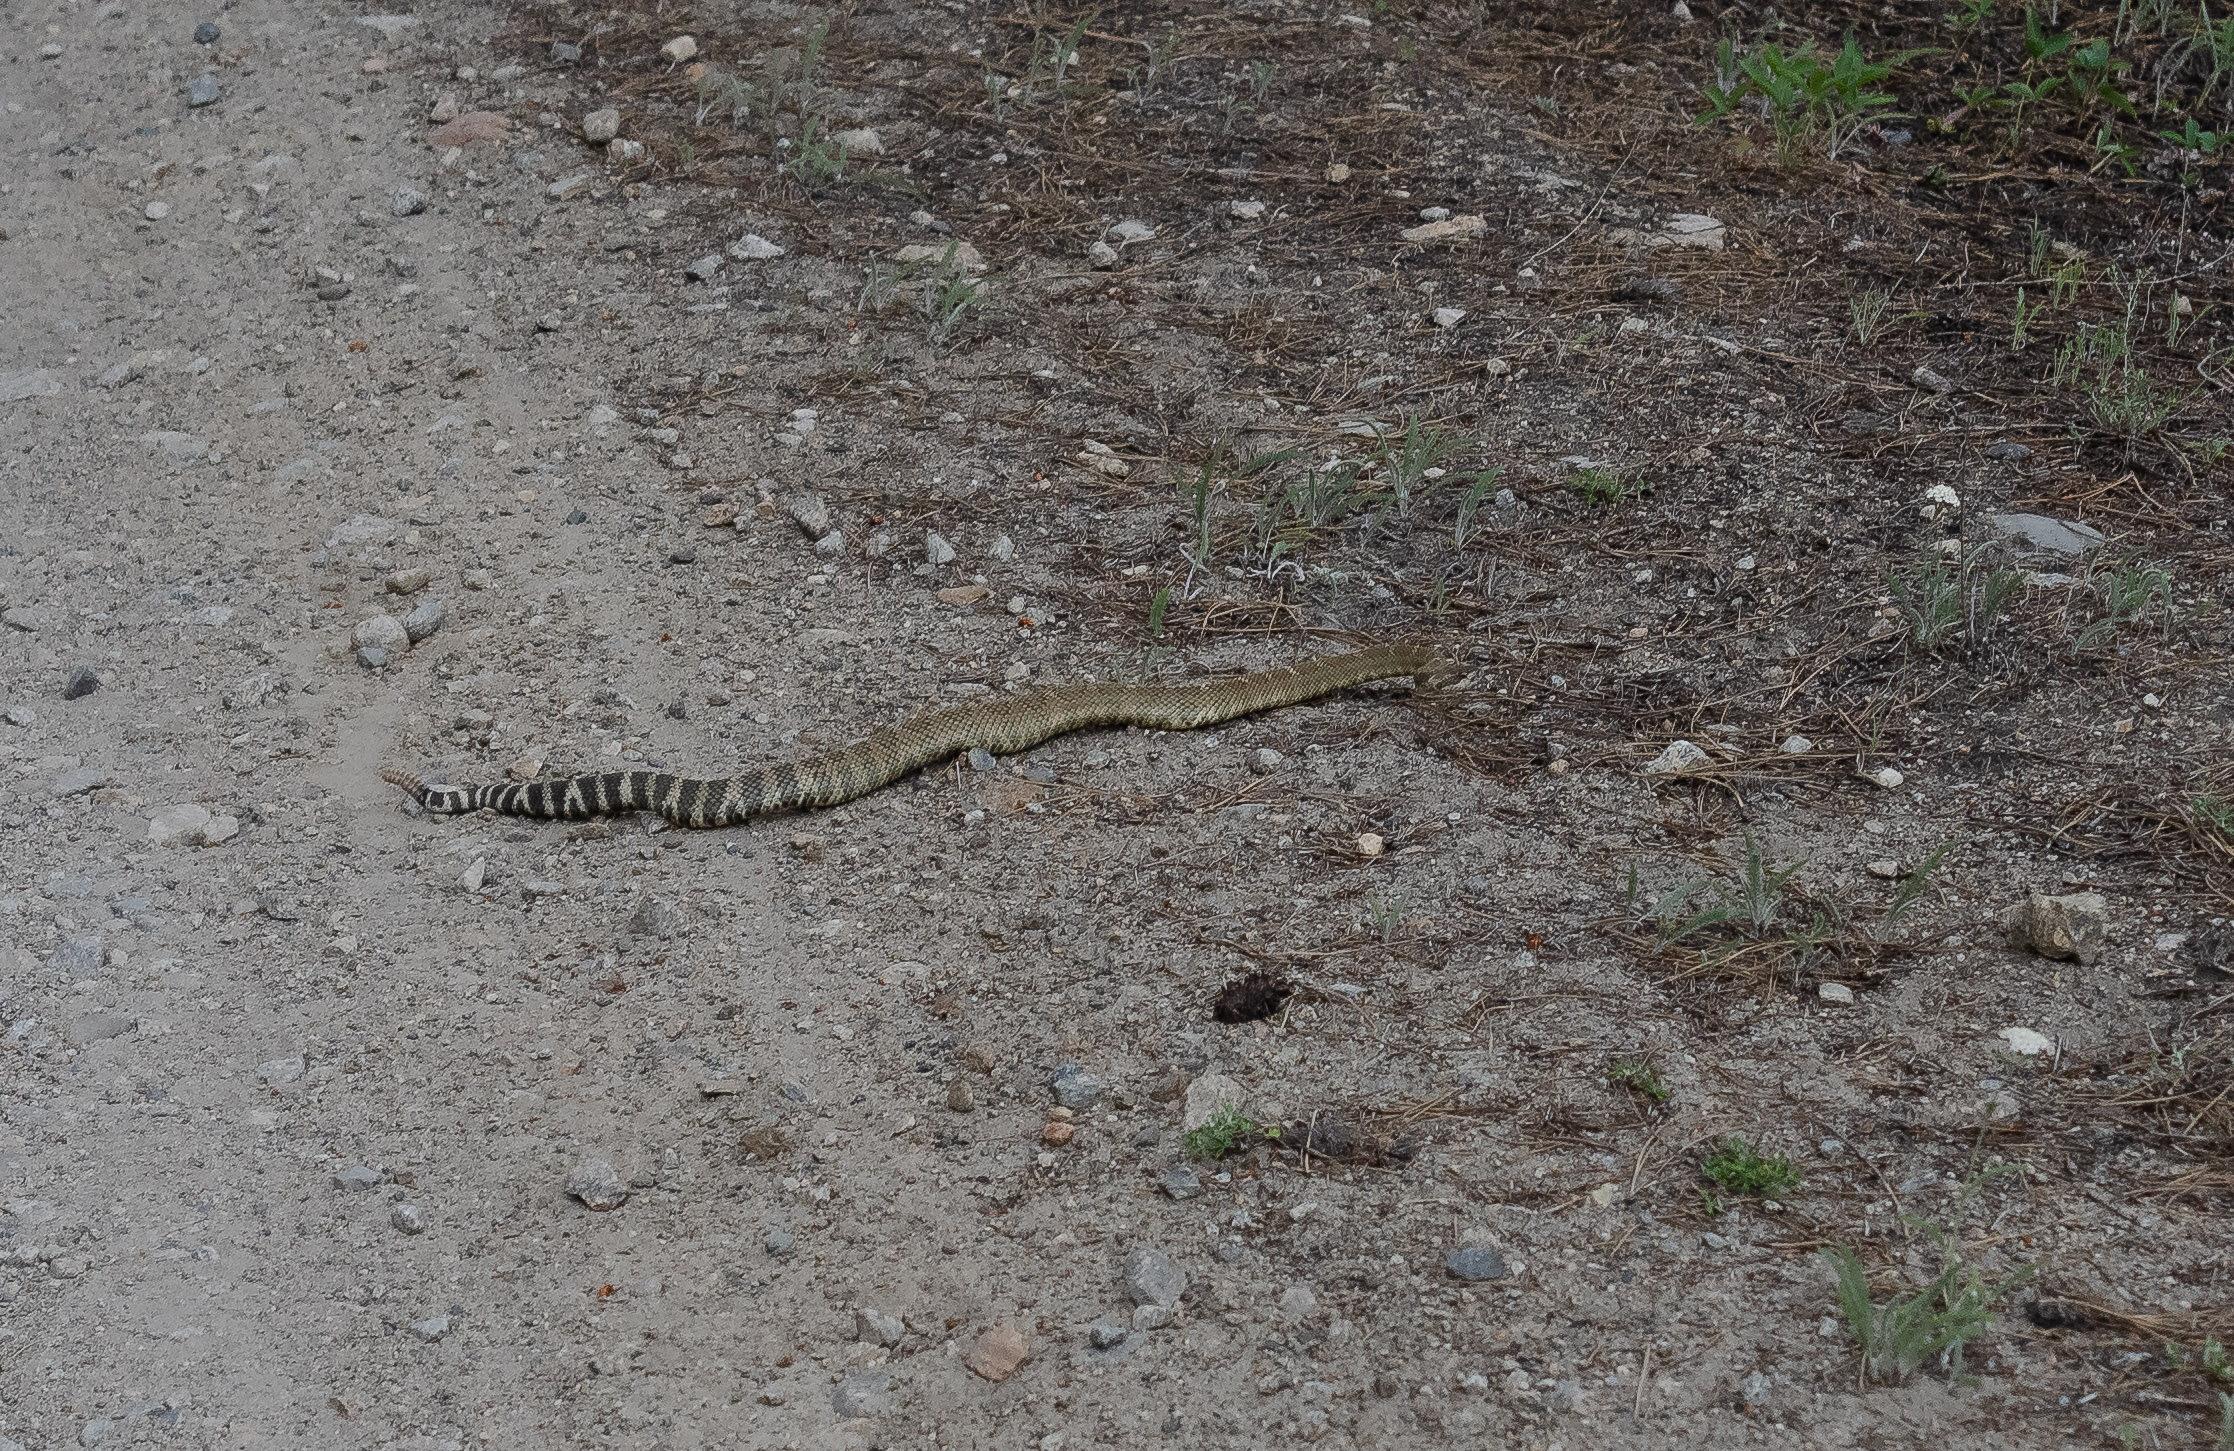  Jeff cycled within inches of this rattlesnake! It reared up and came at him as he went by, but thankfully he was going fast enough to avoid it. 